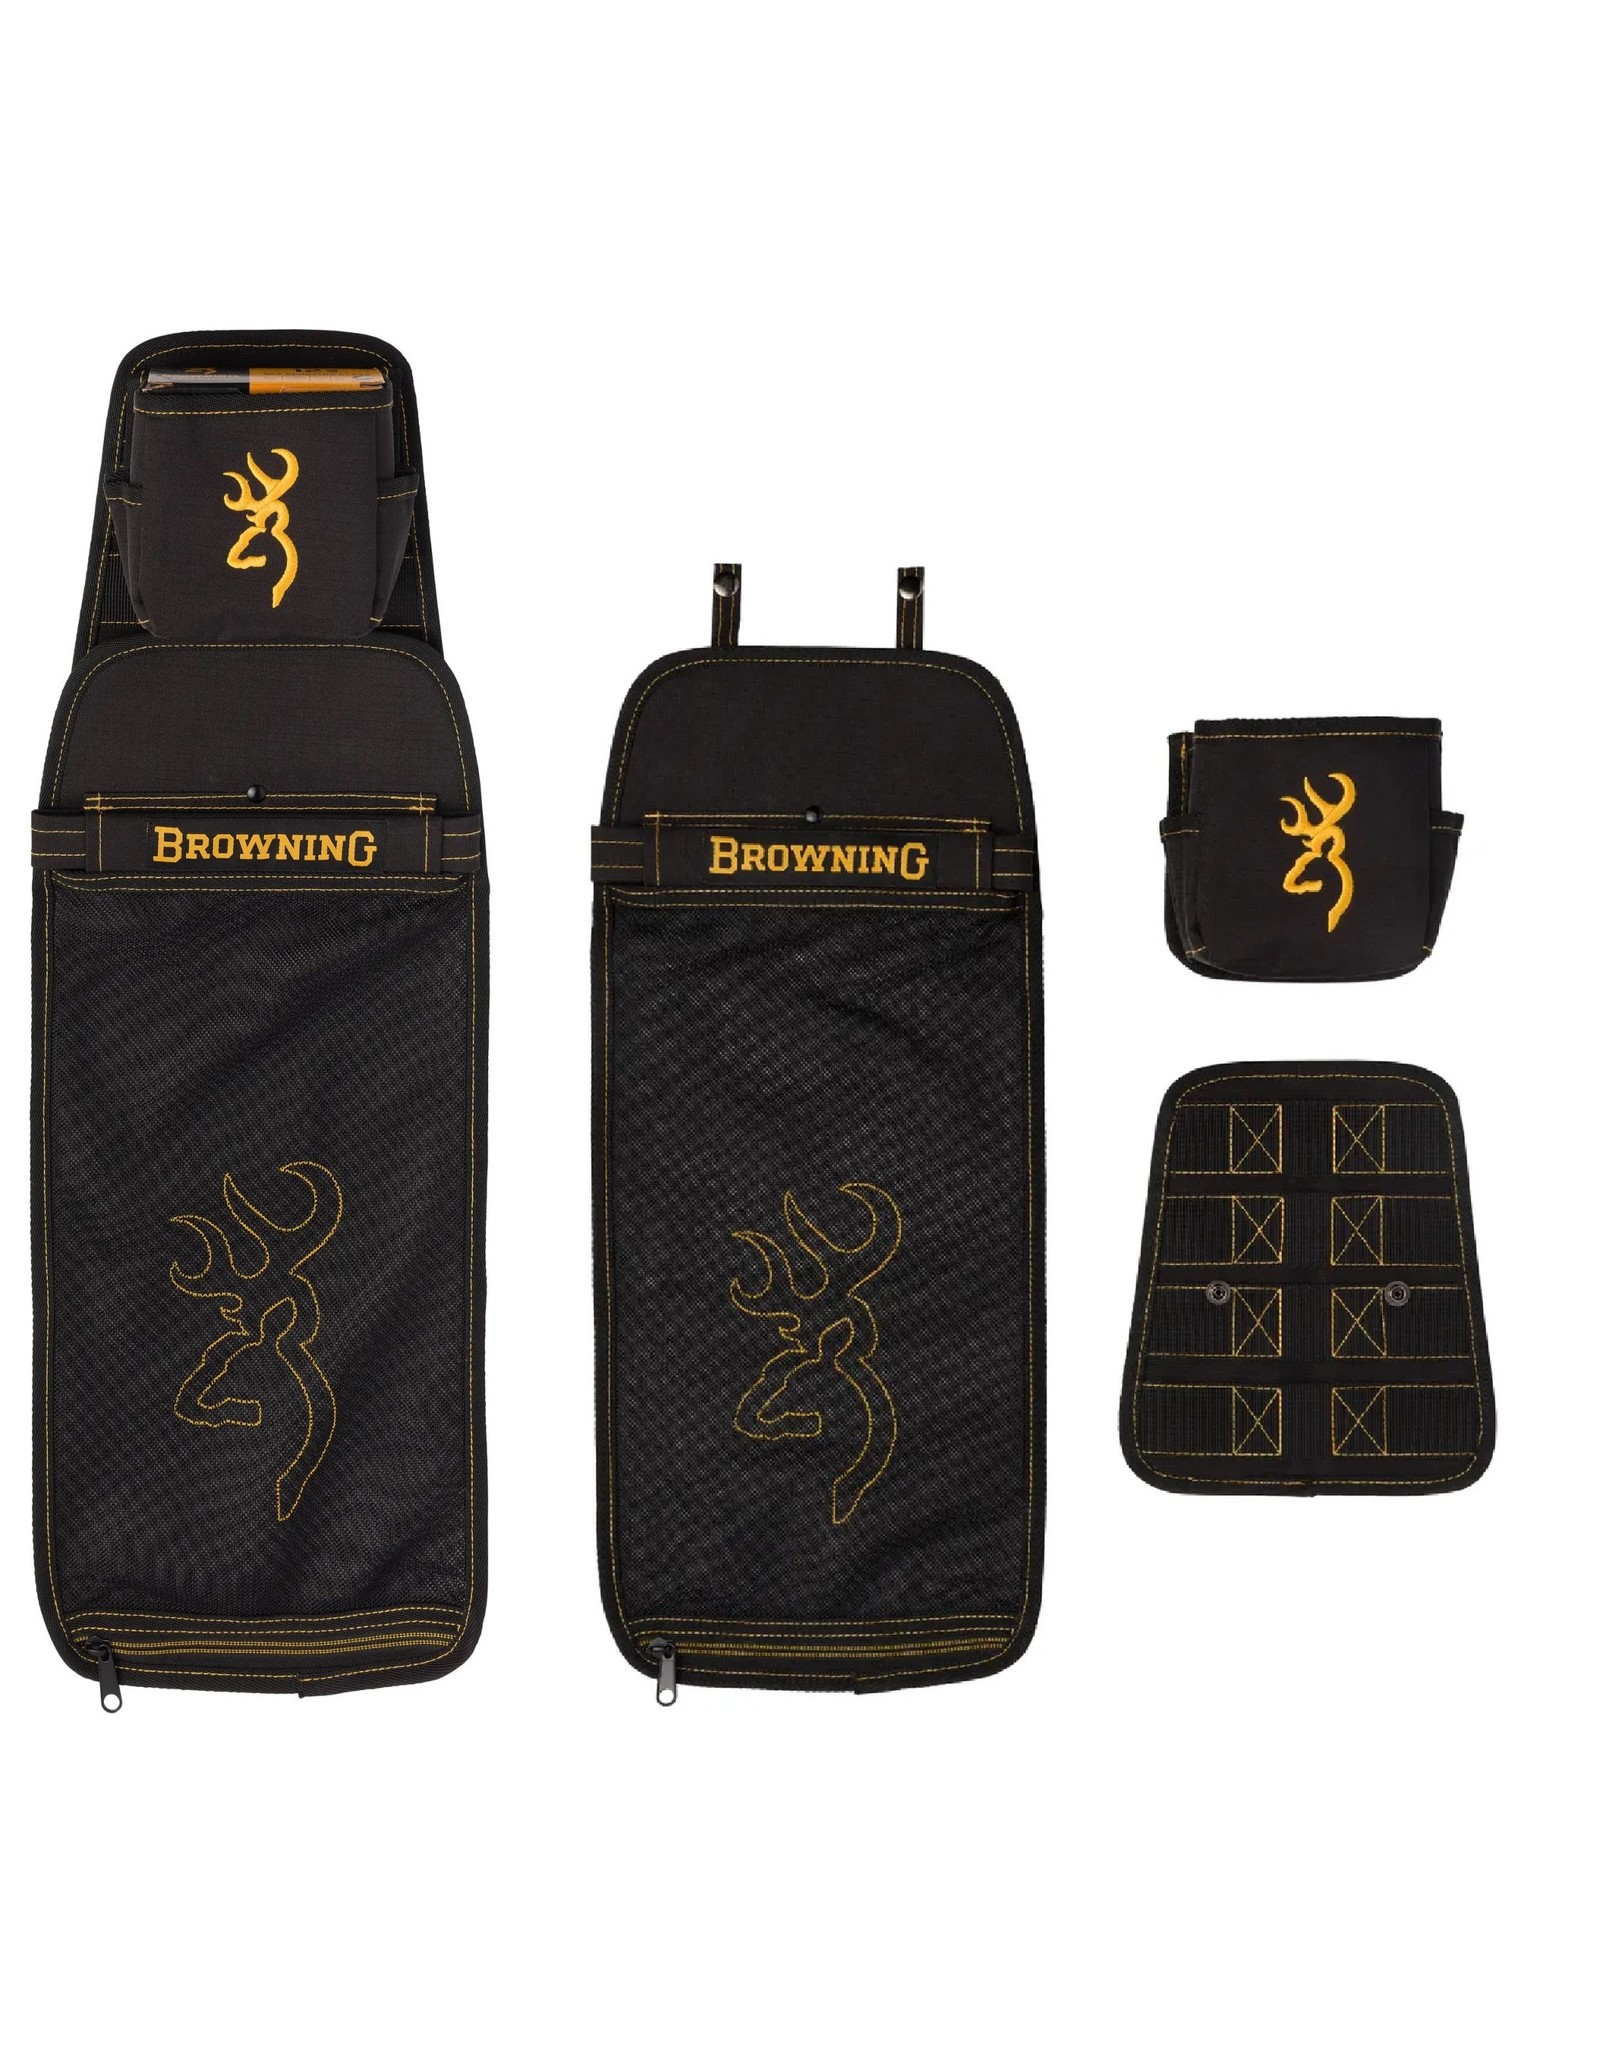 Browning Black & Gold Shell Pouch